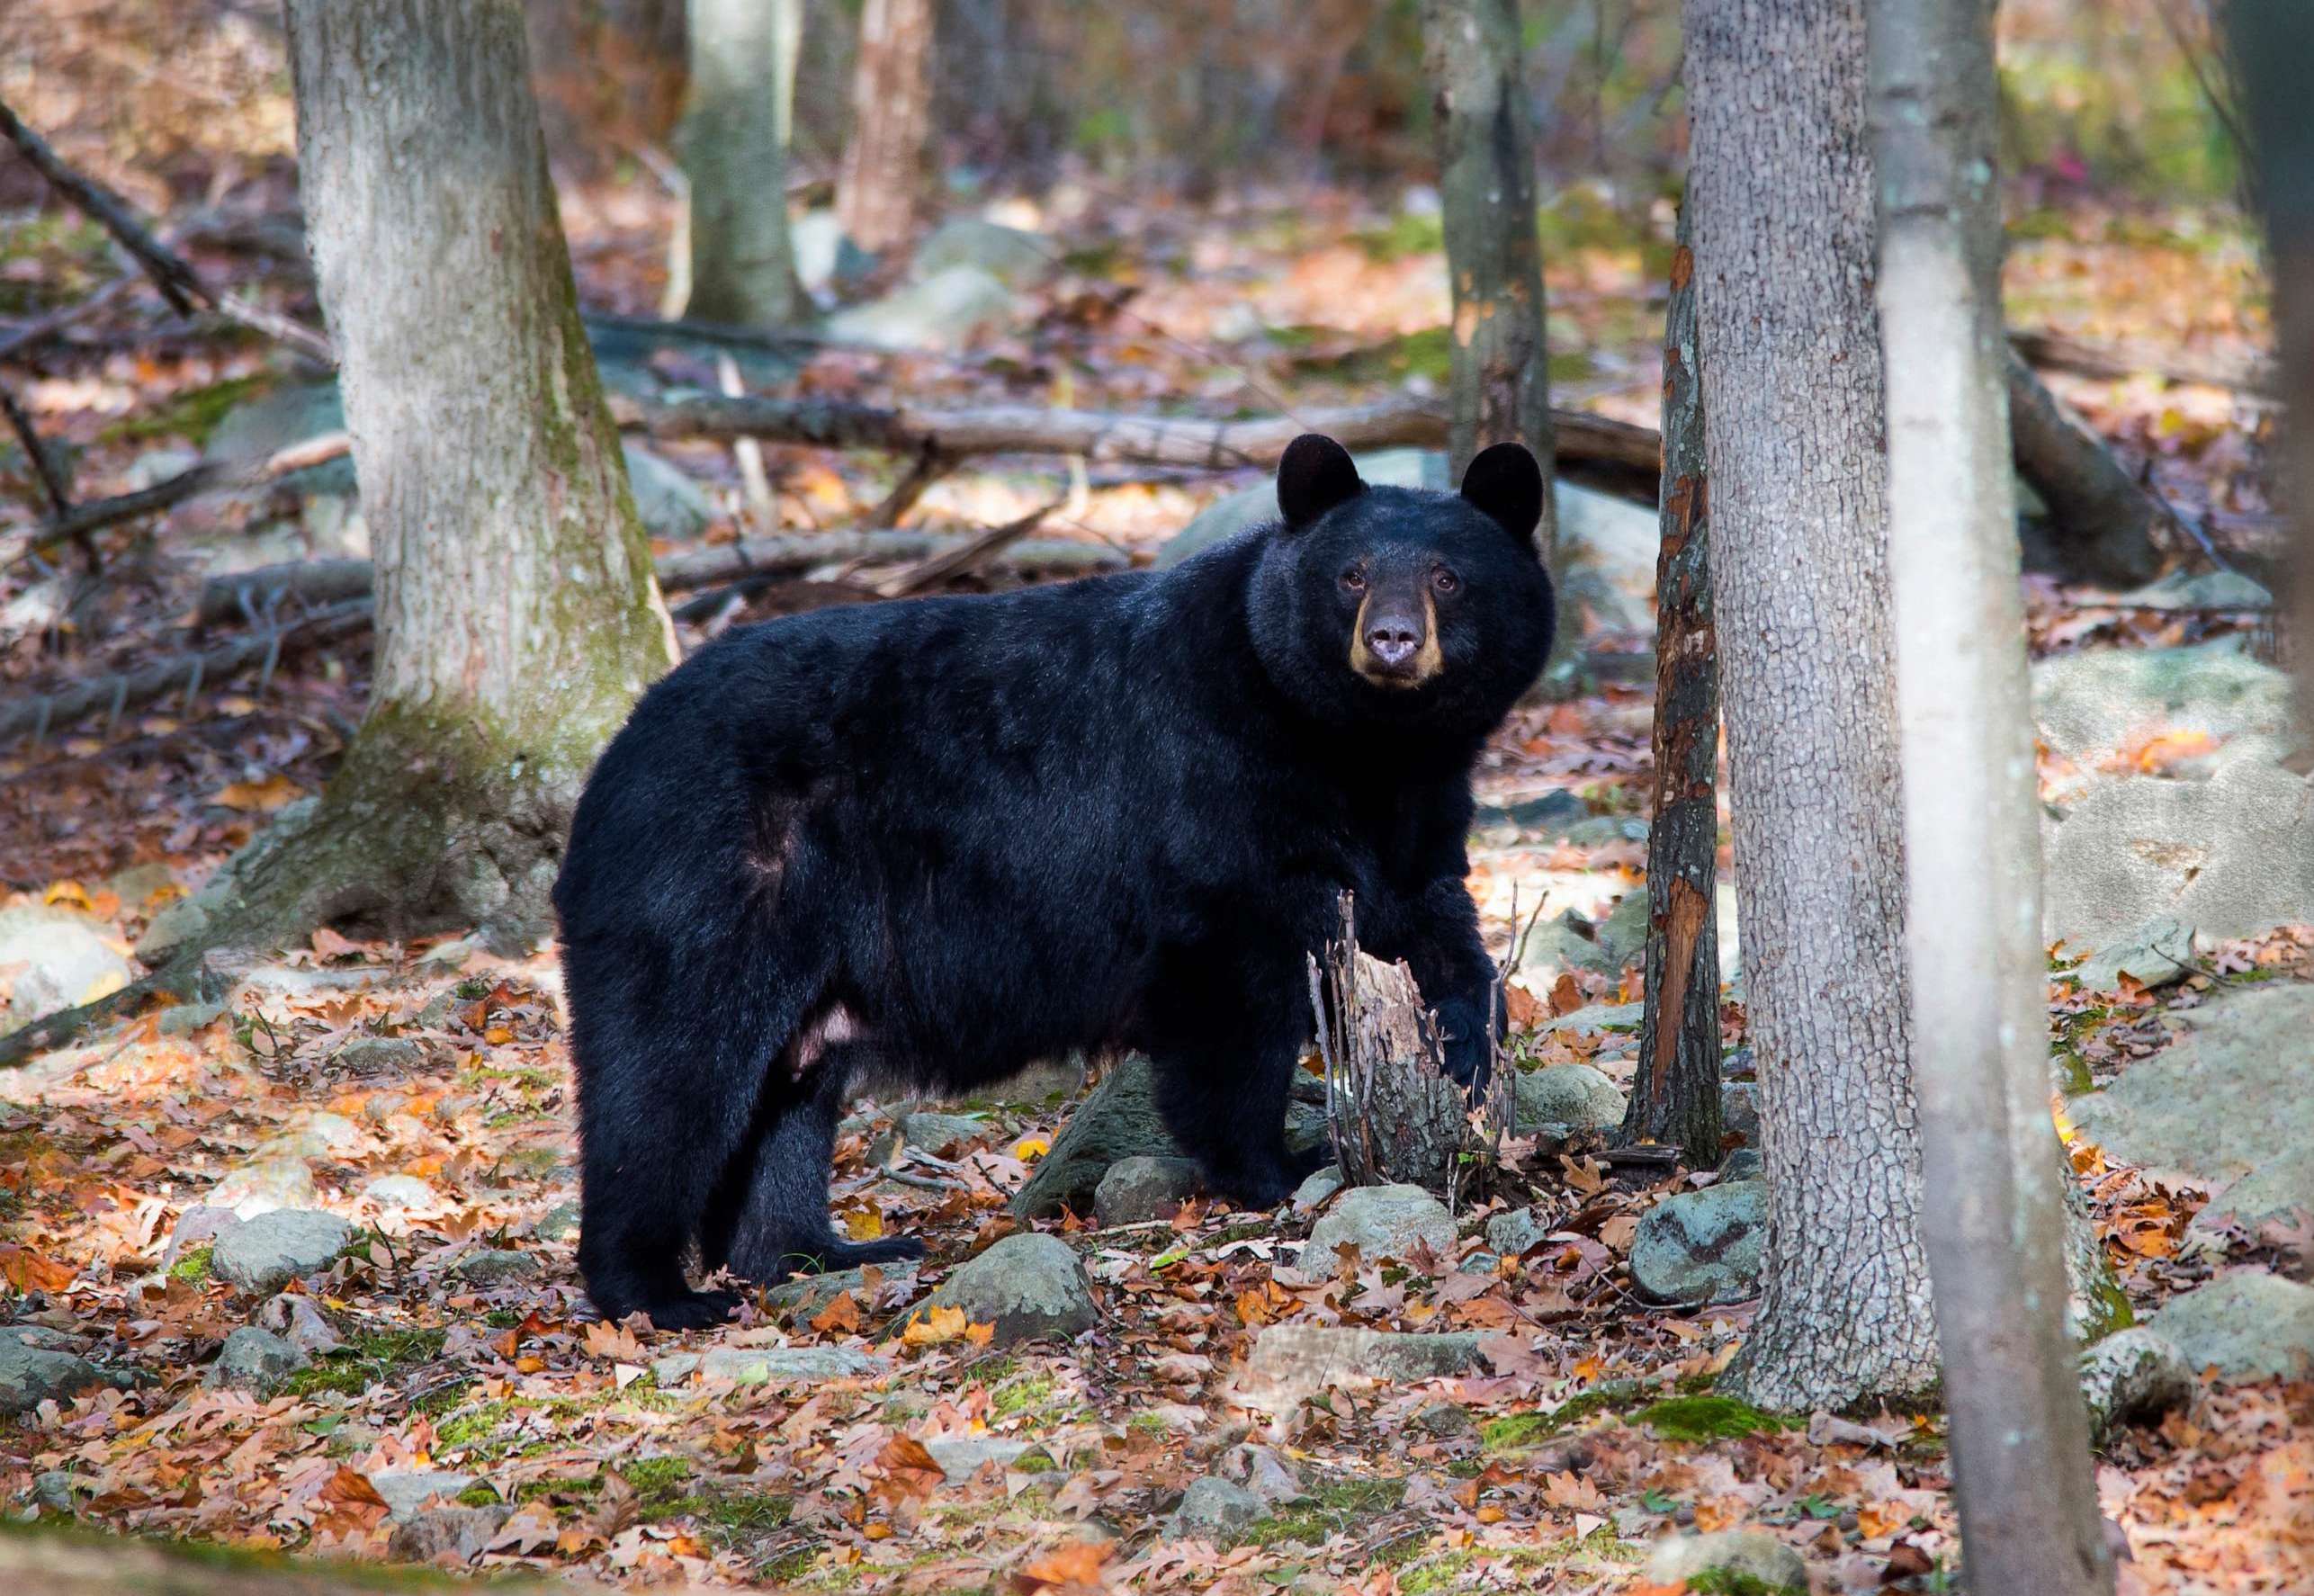 New Jersey may soon allow bear hunting WHYY